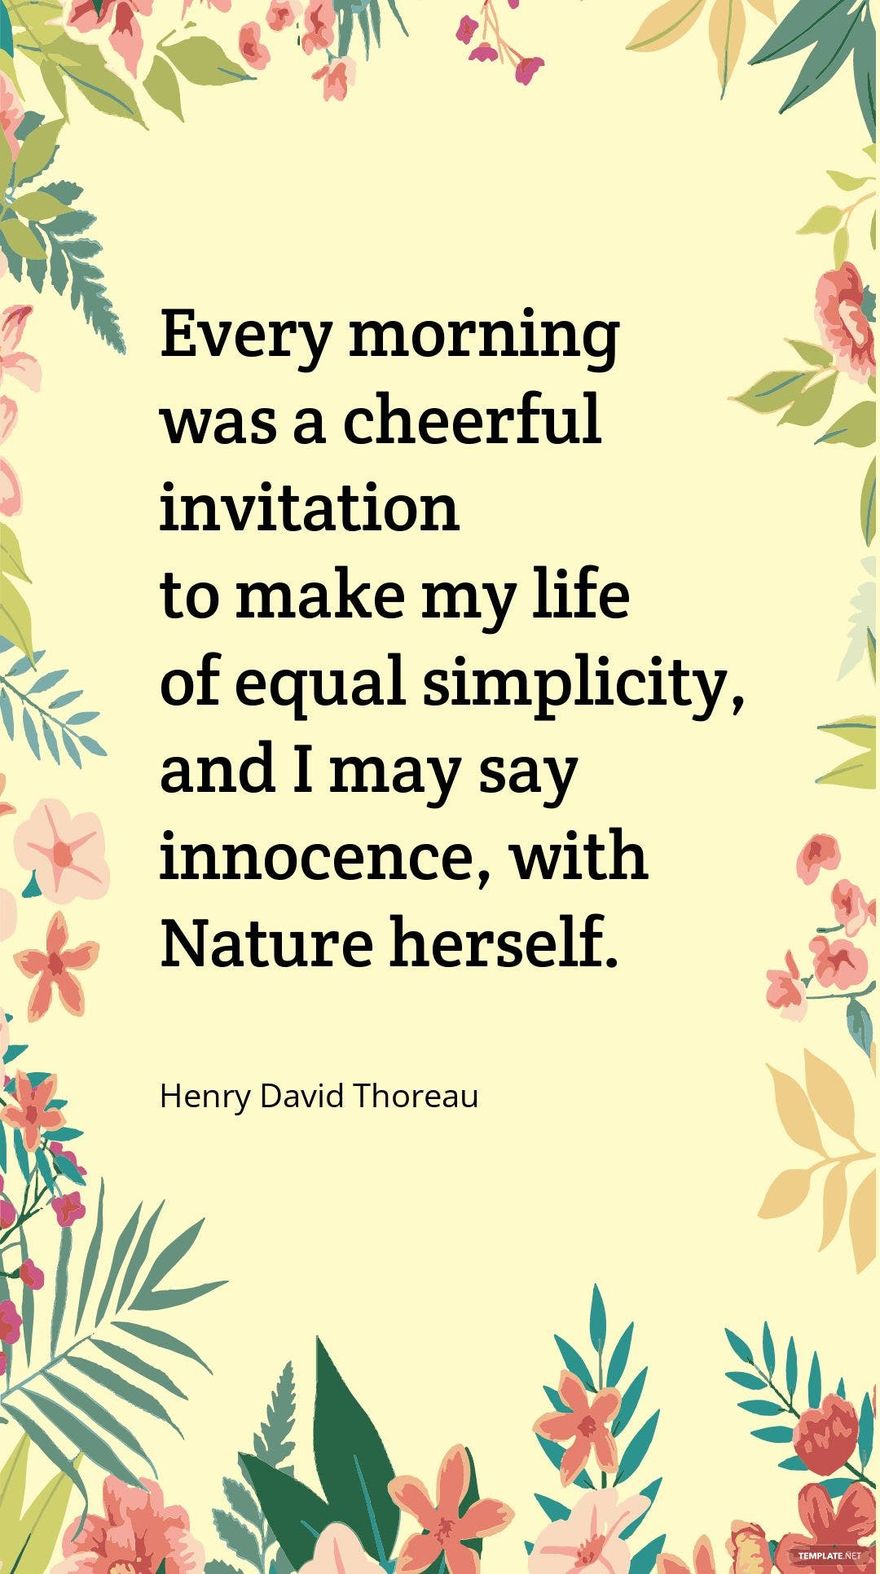 Henry David Thoreau - Every morning was a cheerful invitation to make my life of equal simplicity, and I may say innocence, with Nature herself.